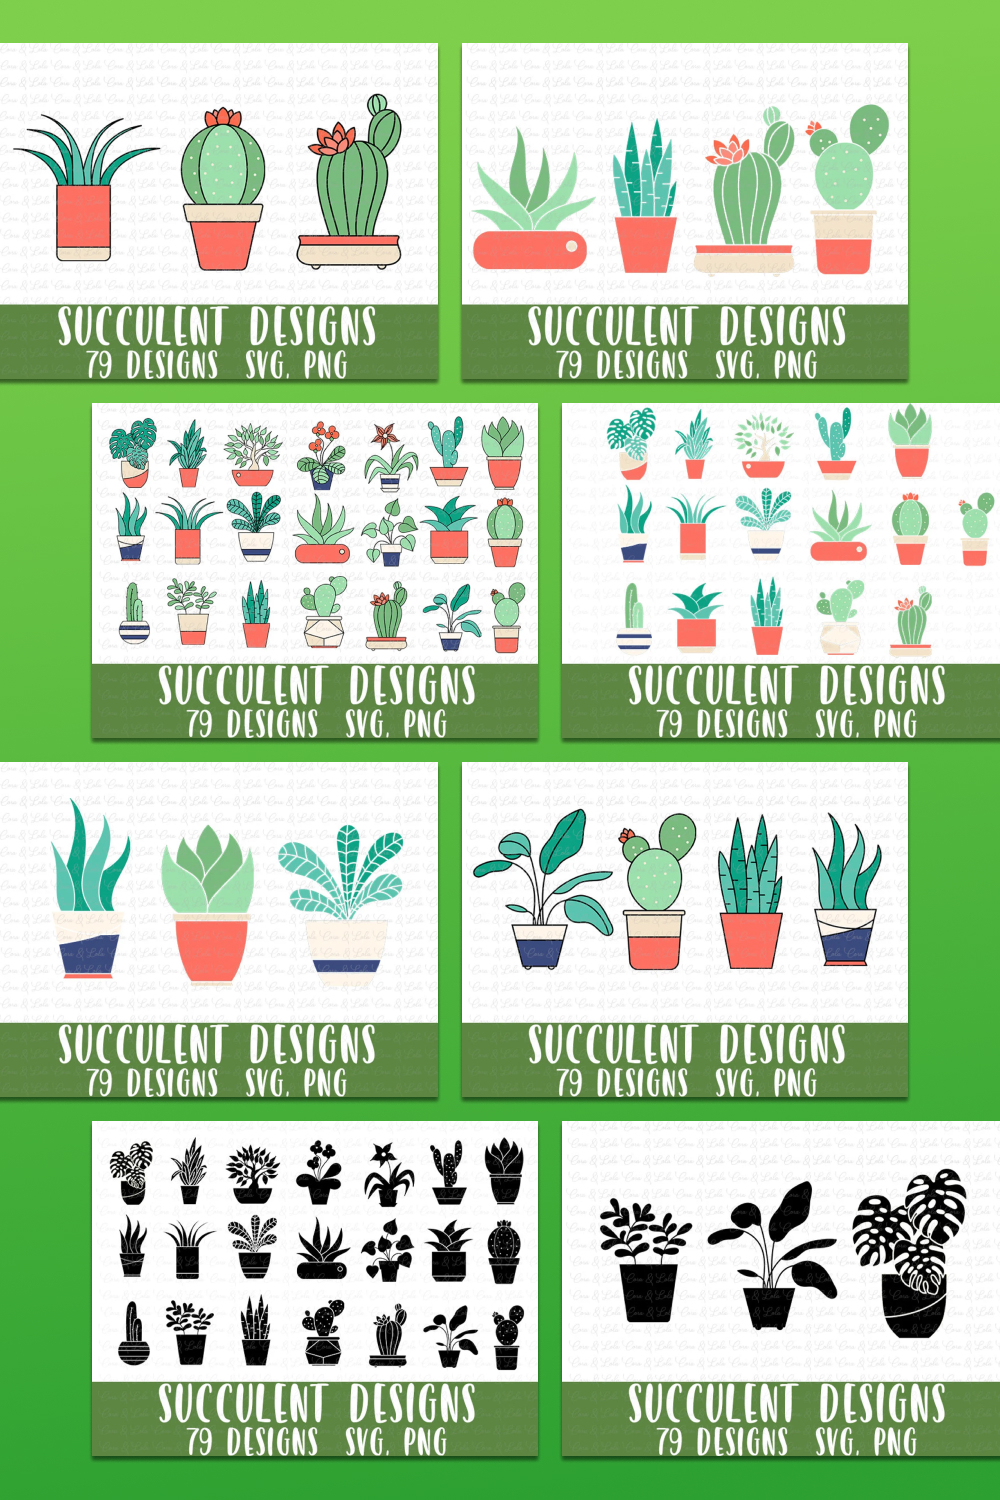 Preview on cards of possible uses of drawings of plants in pots.